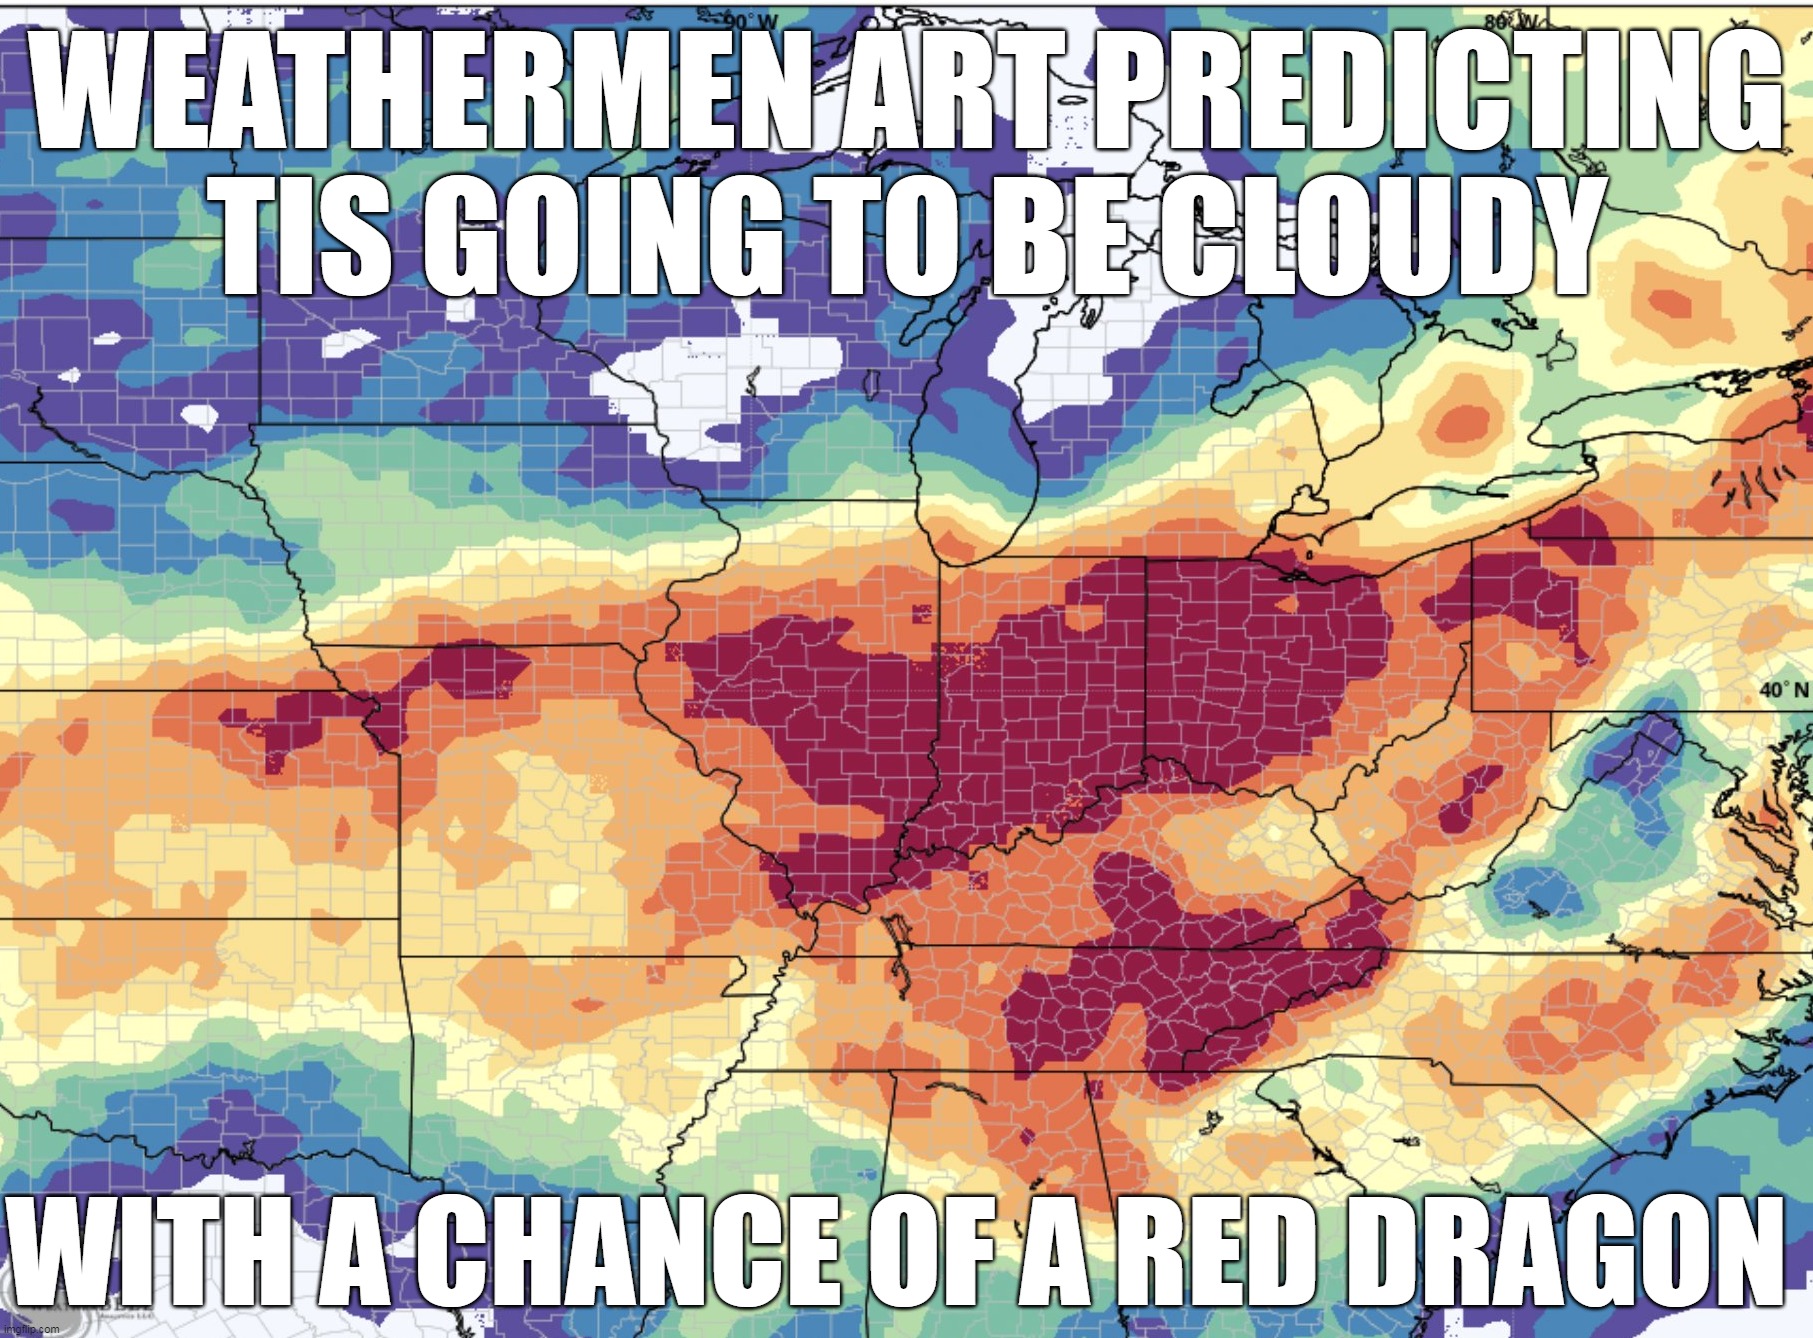 WEATHERMEN ART PREDICTING TIS GOING TO BE CLOUDY; WITH A CHANCE OF A RED DRAGON | image tagged in meme,memes,funny | made w/ Imgflip meme maker